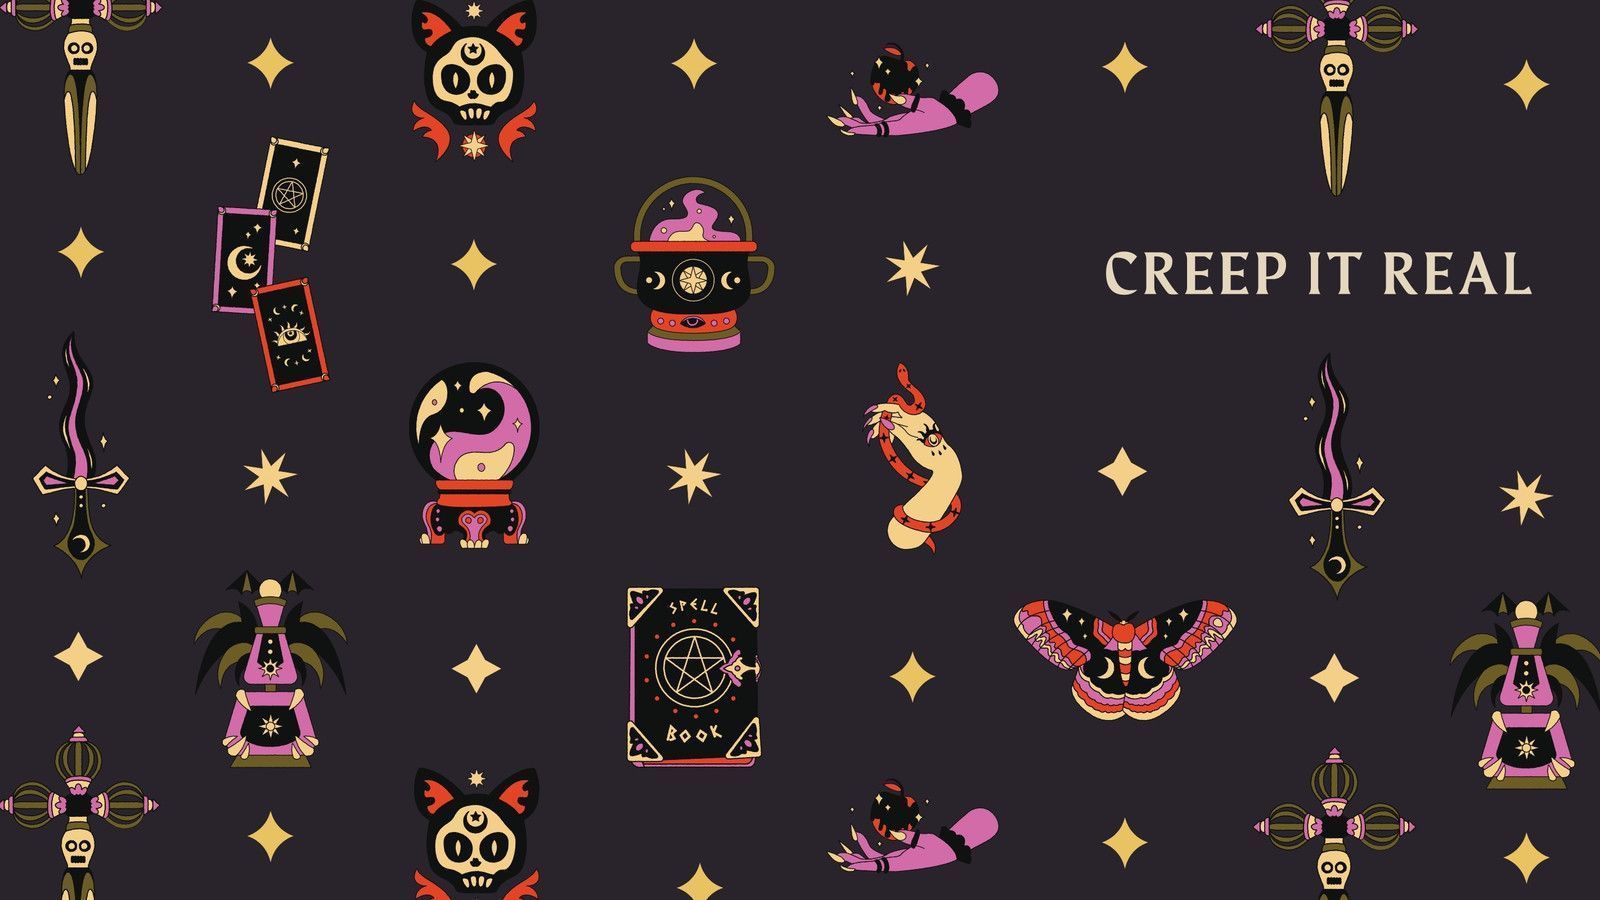 Creep it real wallpaper with various illustrations of a witch, skull, knife, cat, and more. - Halloween, Halloween desktop, spooky